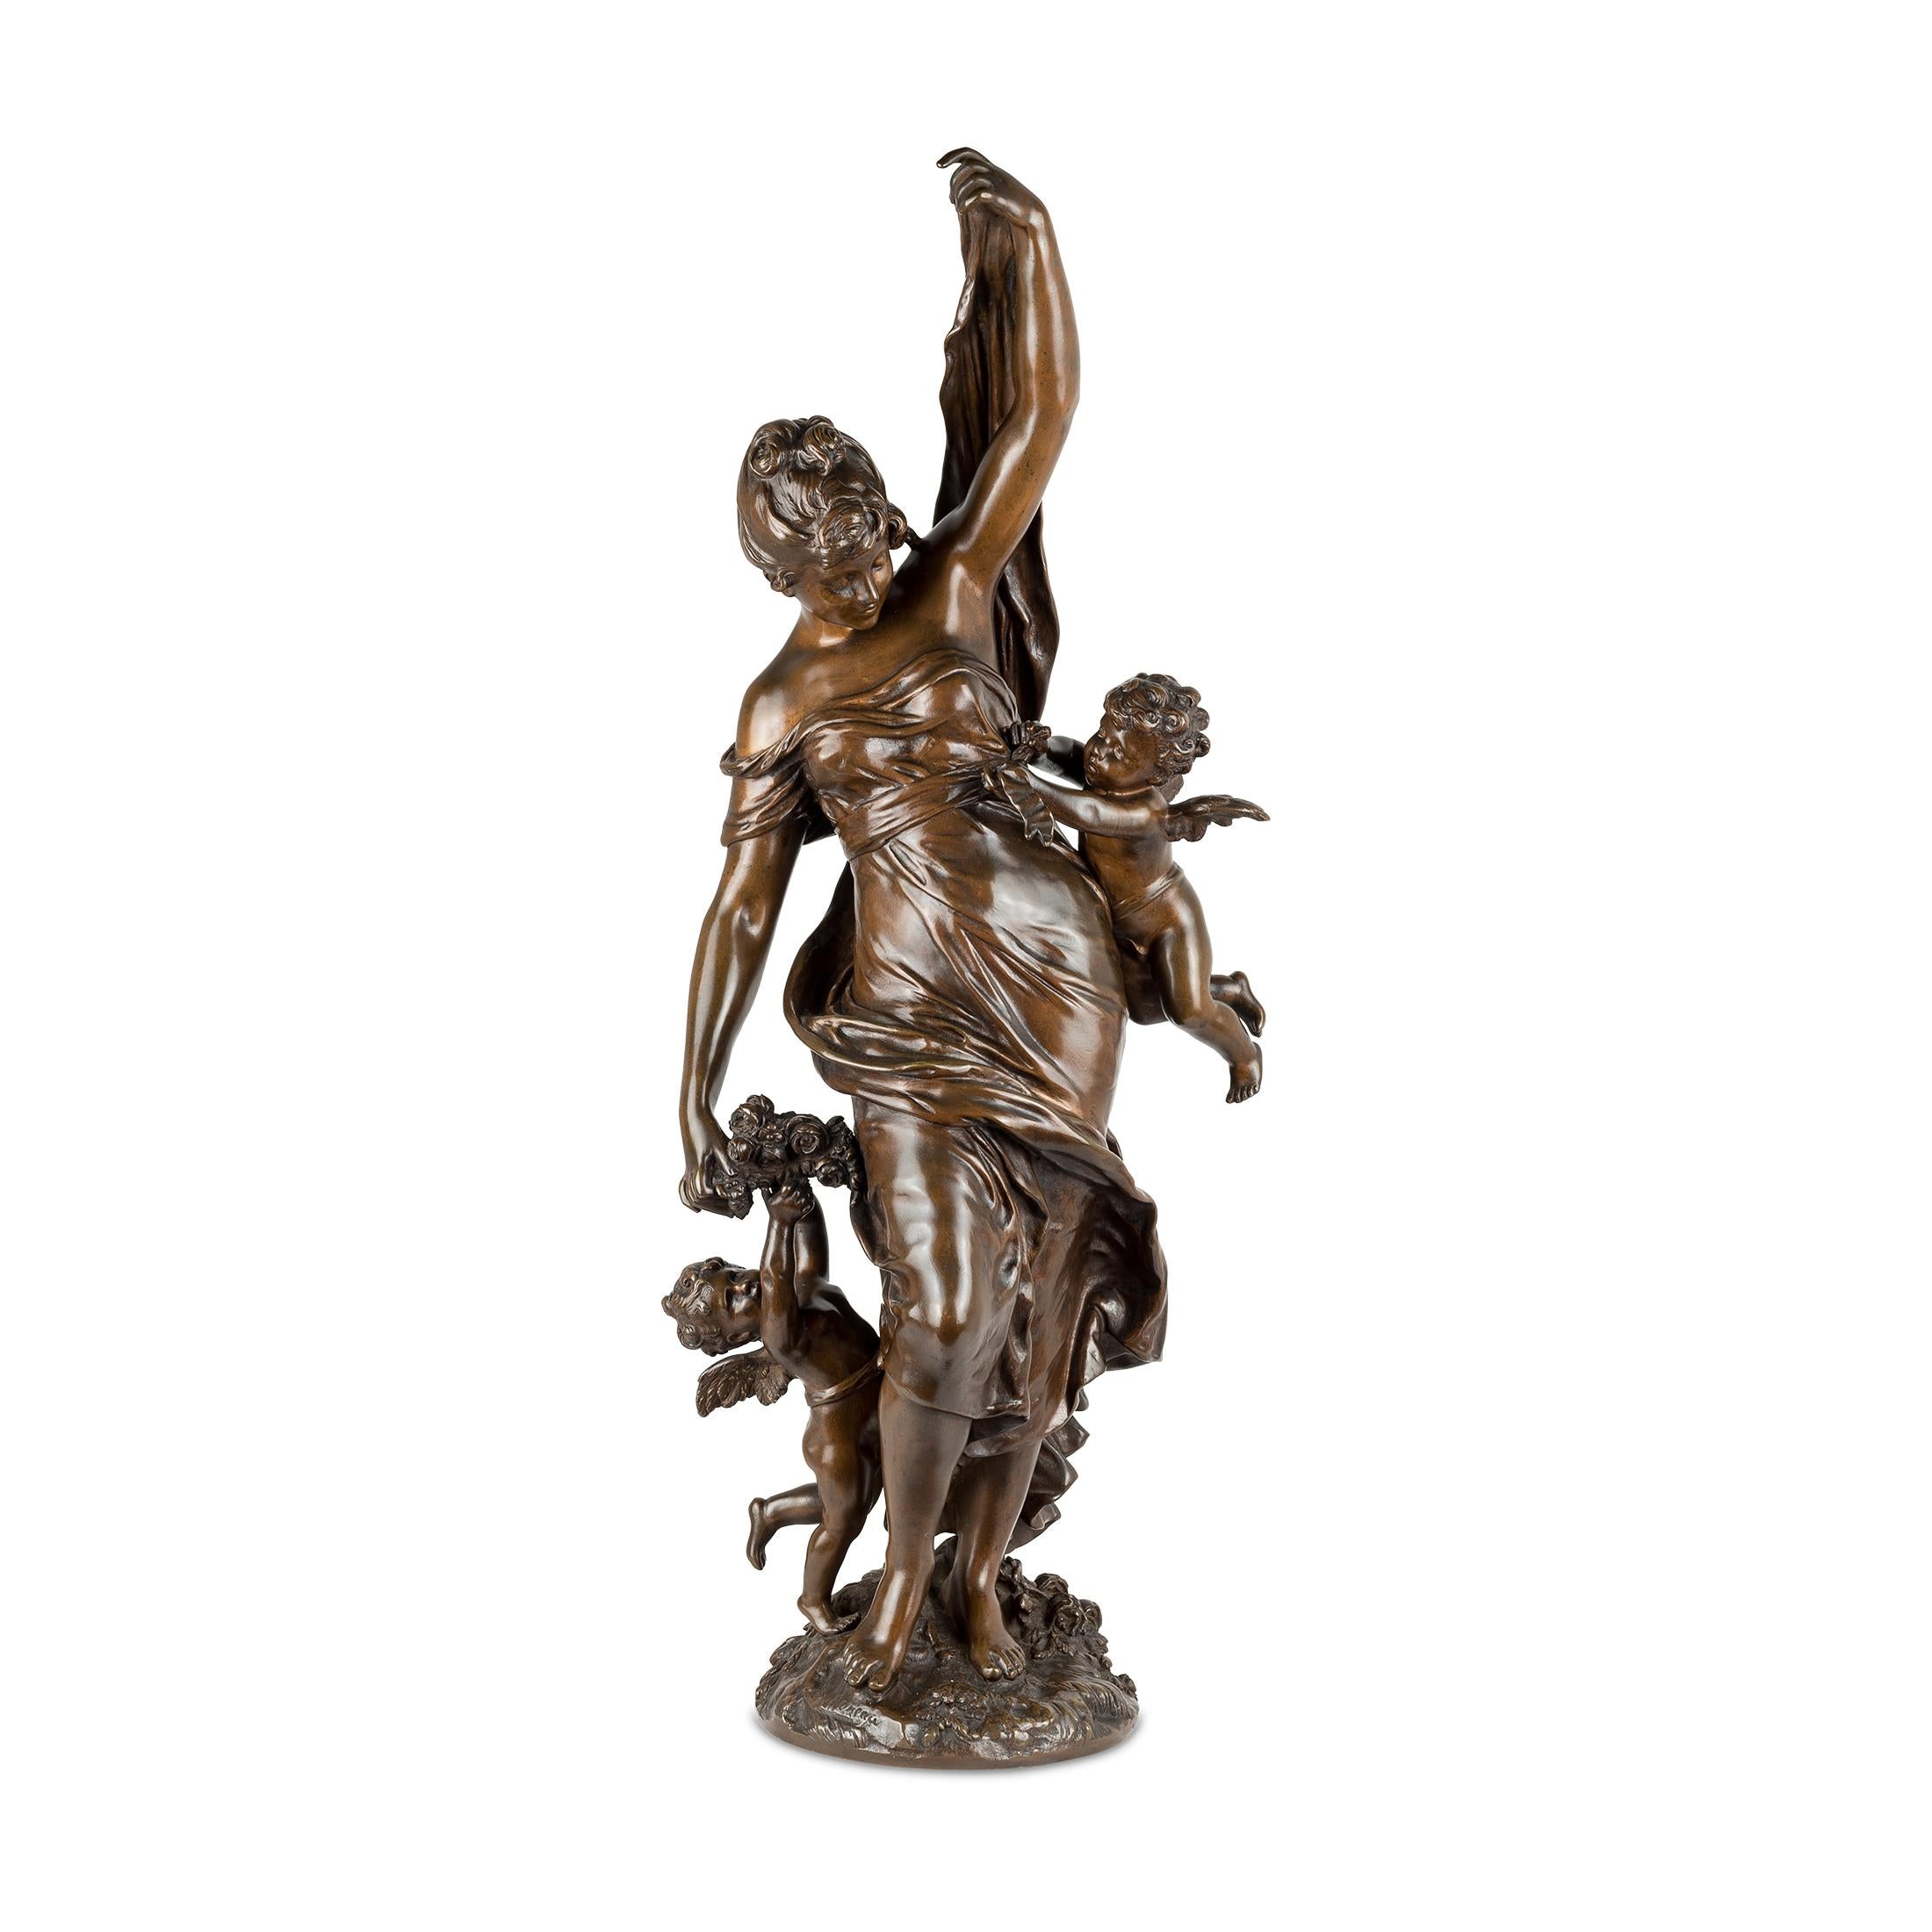 Louis Auguste Moreau Figurative Sculpture - Figural Group of Venus Flanked by Putti